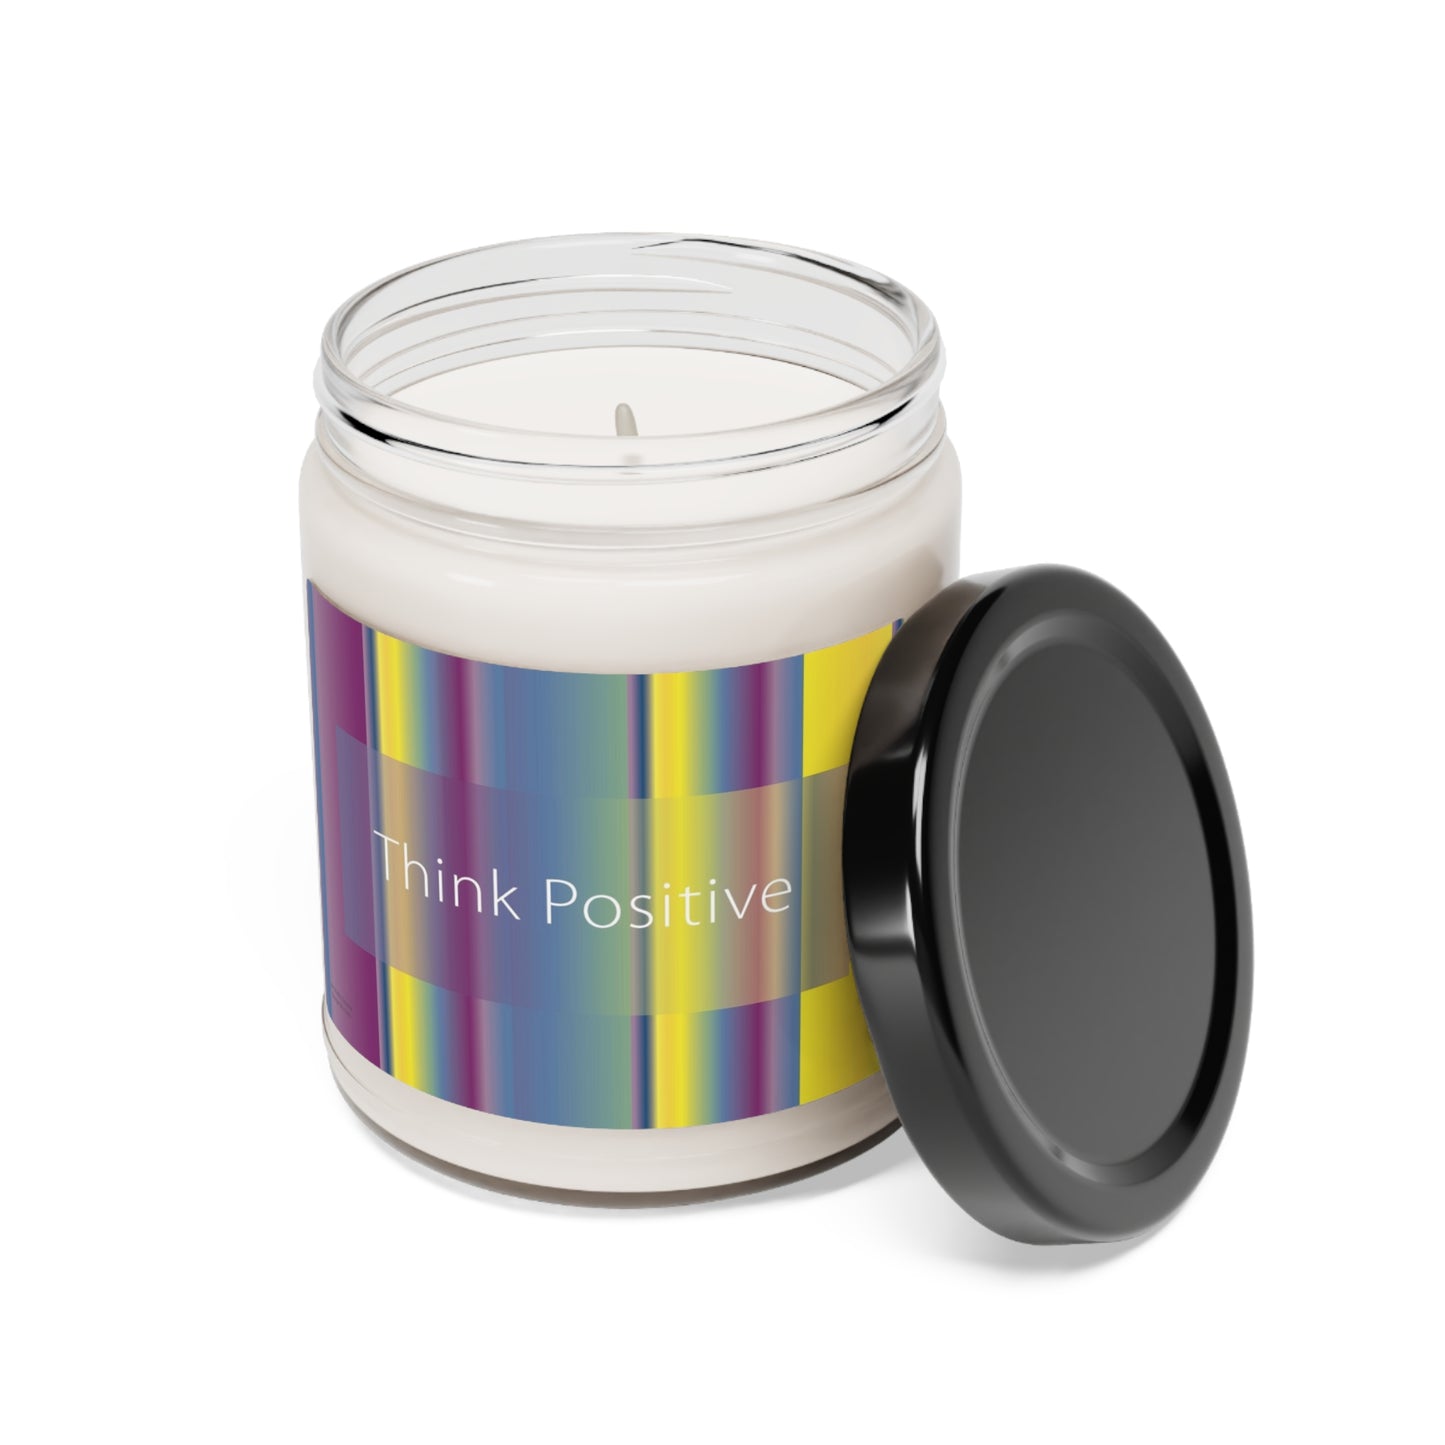 Scented Soy Candle, 9oz Think Positive - Design No.1300